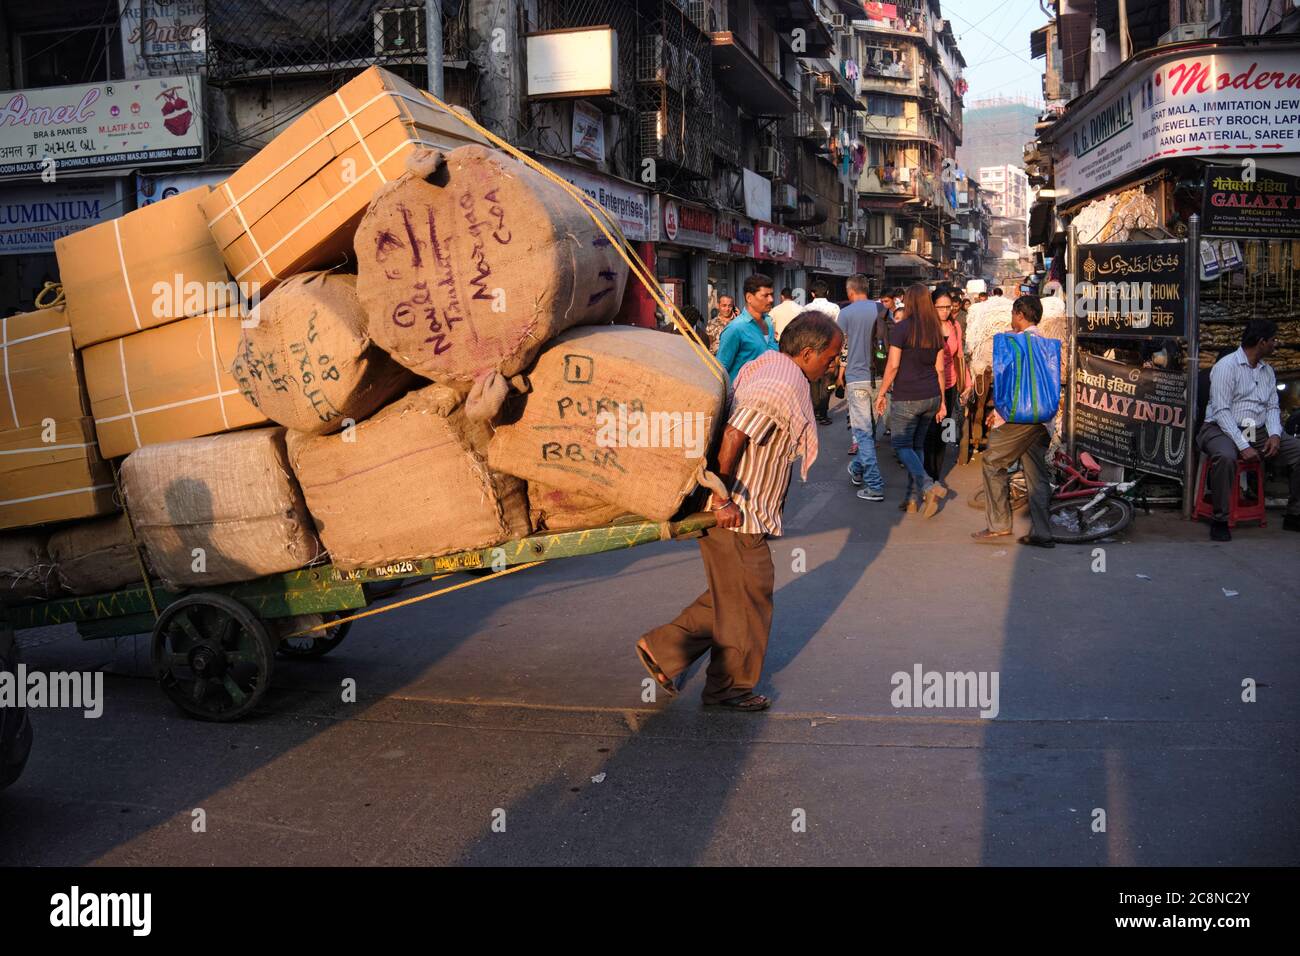 A man pulls a heavy handcart through Kalbadevi Rd. in Bhuleshwar, Mumbai, India, handcarts being the most used mode for goods transport in the area Stock Photo